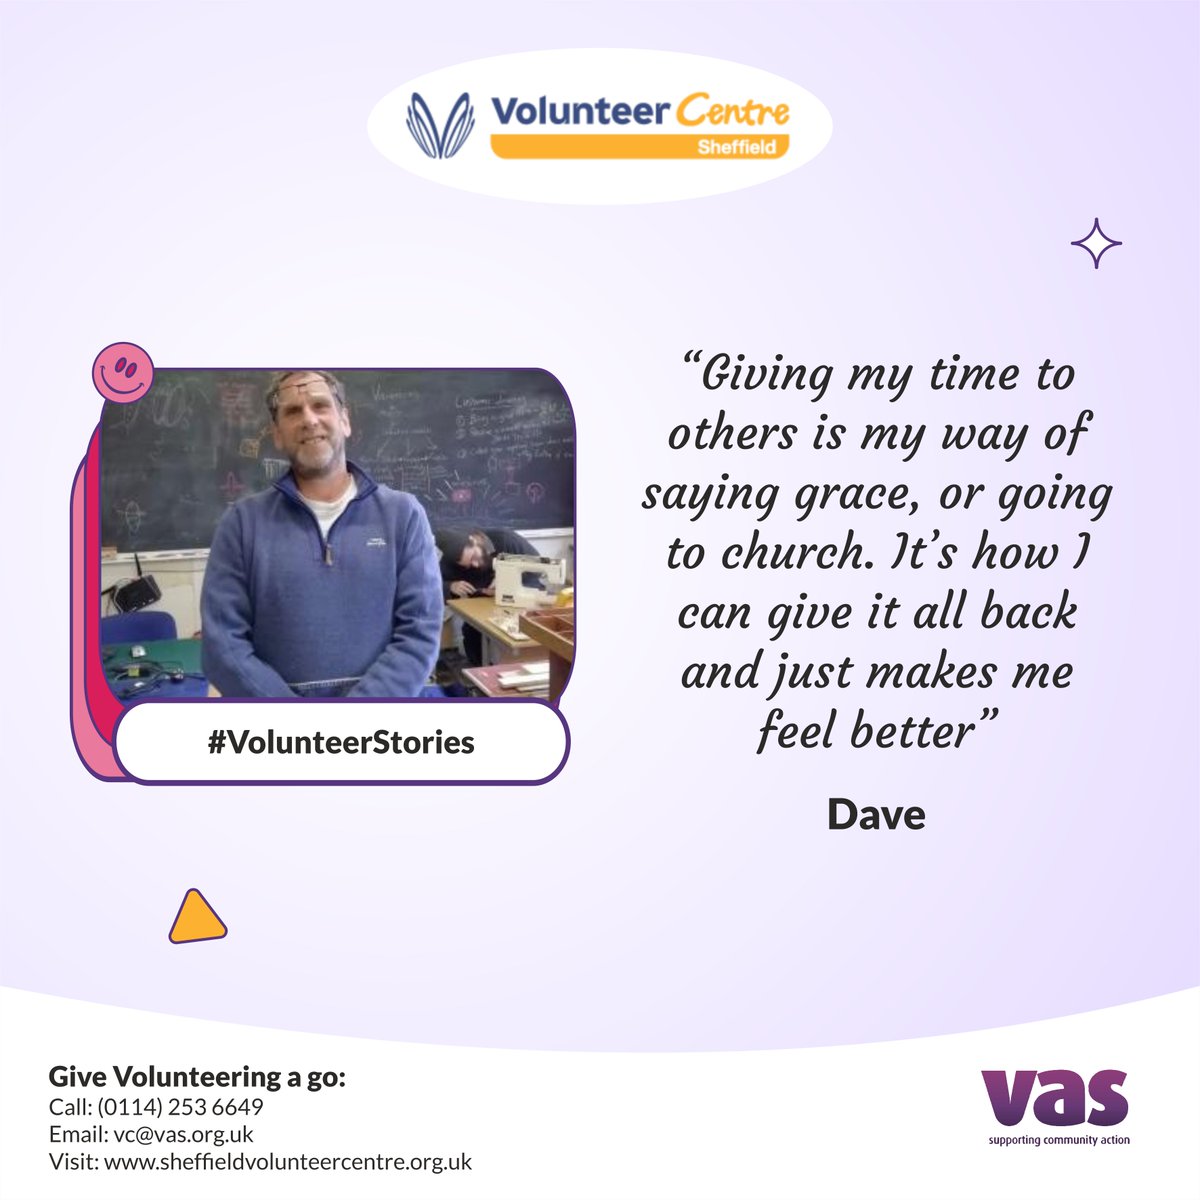 Dave volunteers and is the Director of @ReytRepair - he shares his inspiring story here: bit.ly/3Vatte1 Want to give volunteering a go? Check out 200+ opportunities in #Sheffield: sheffieldvolunteercentre.org.uk or call us on (0114) 253 6649 (Mon-Weds)